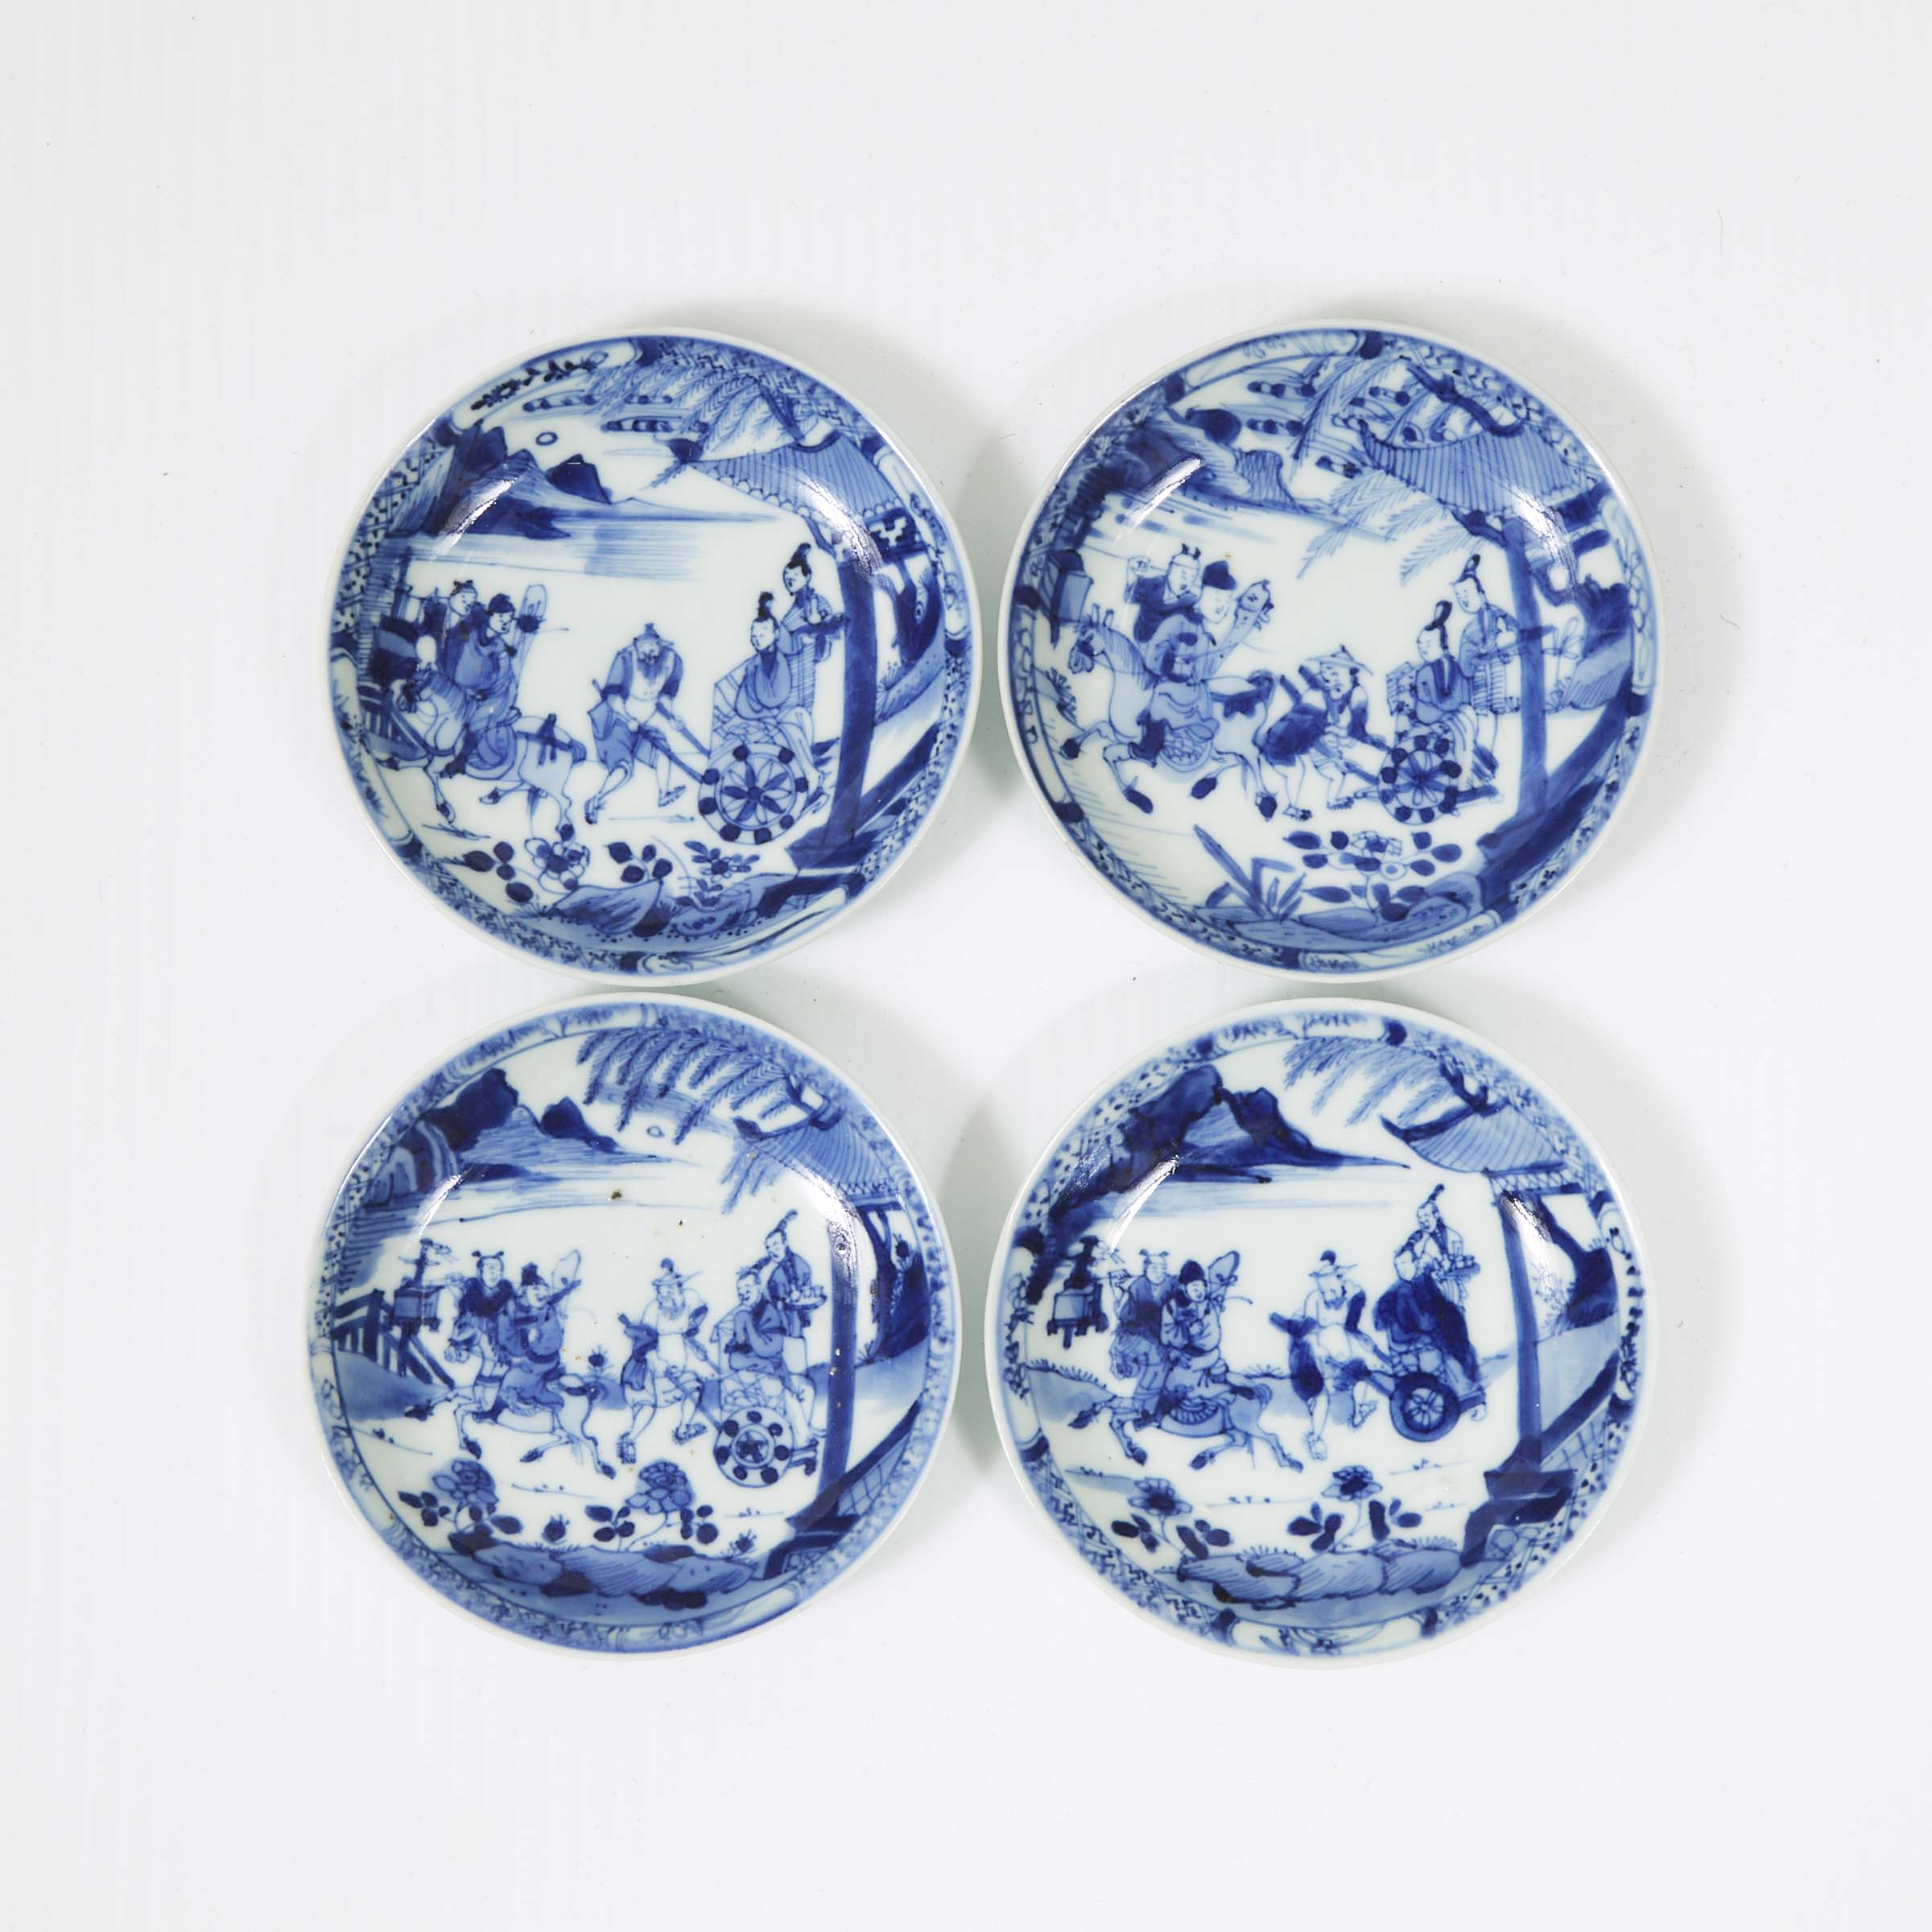 A Set of Four Blue and White Figural Saucer Dishes, Kangxi Period, 17th/18th Century